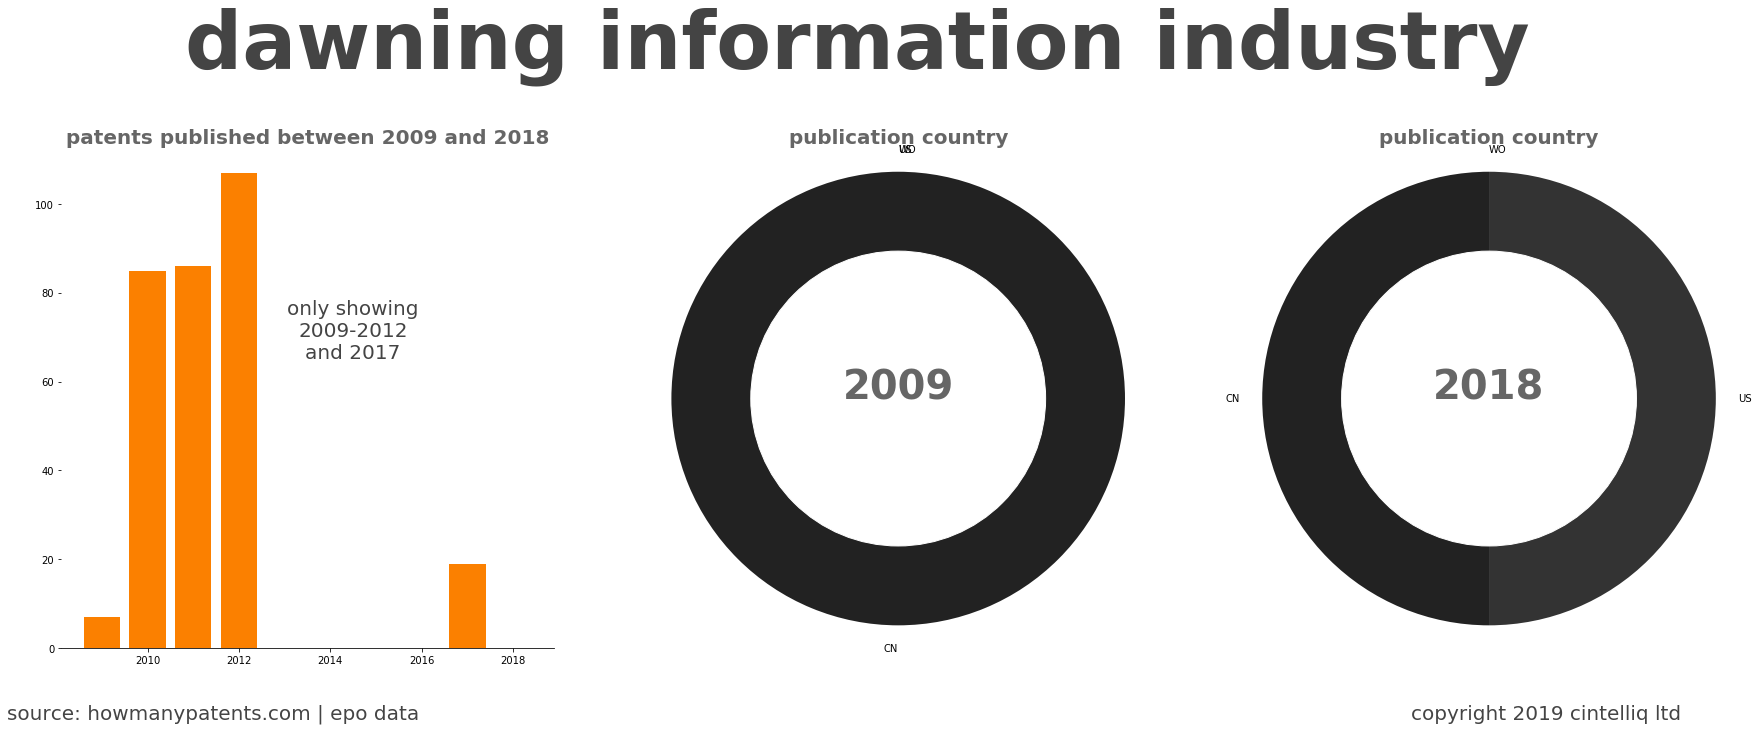 summary of patents for Dawning Information Industry 